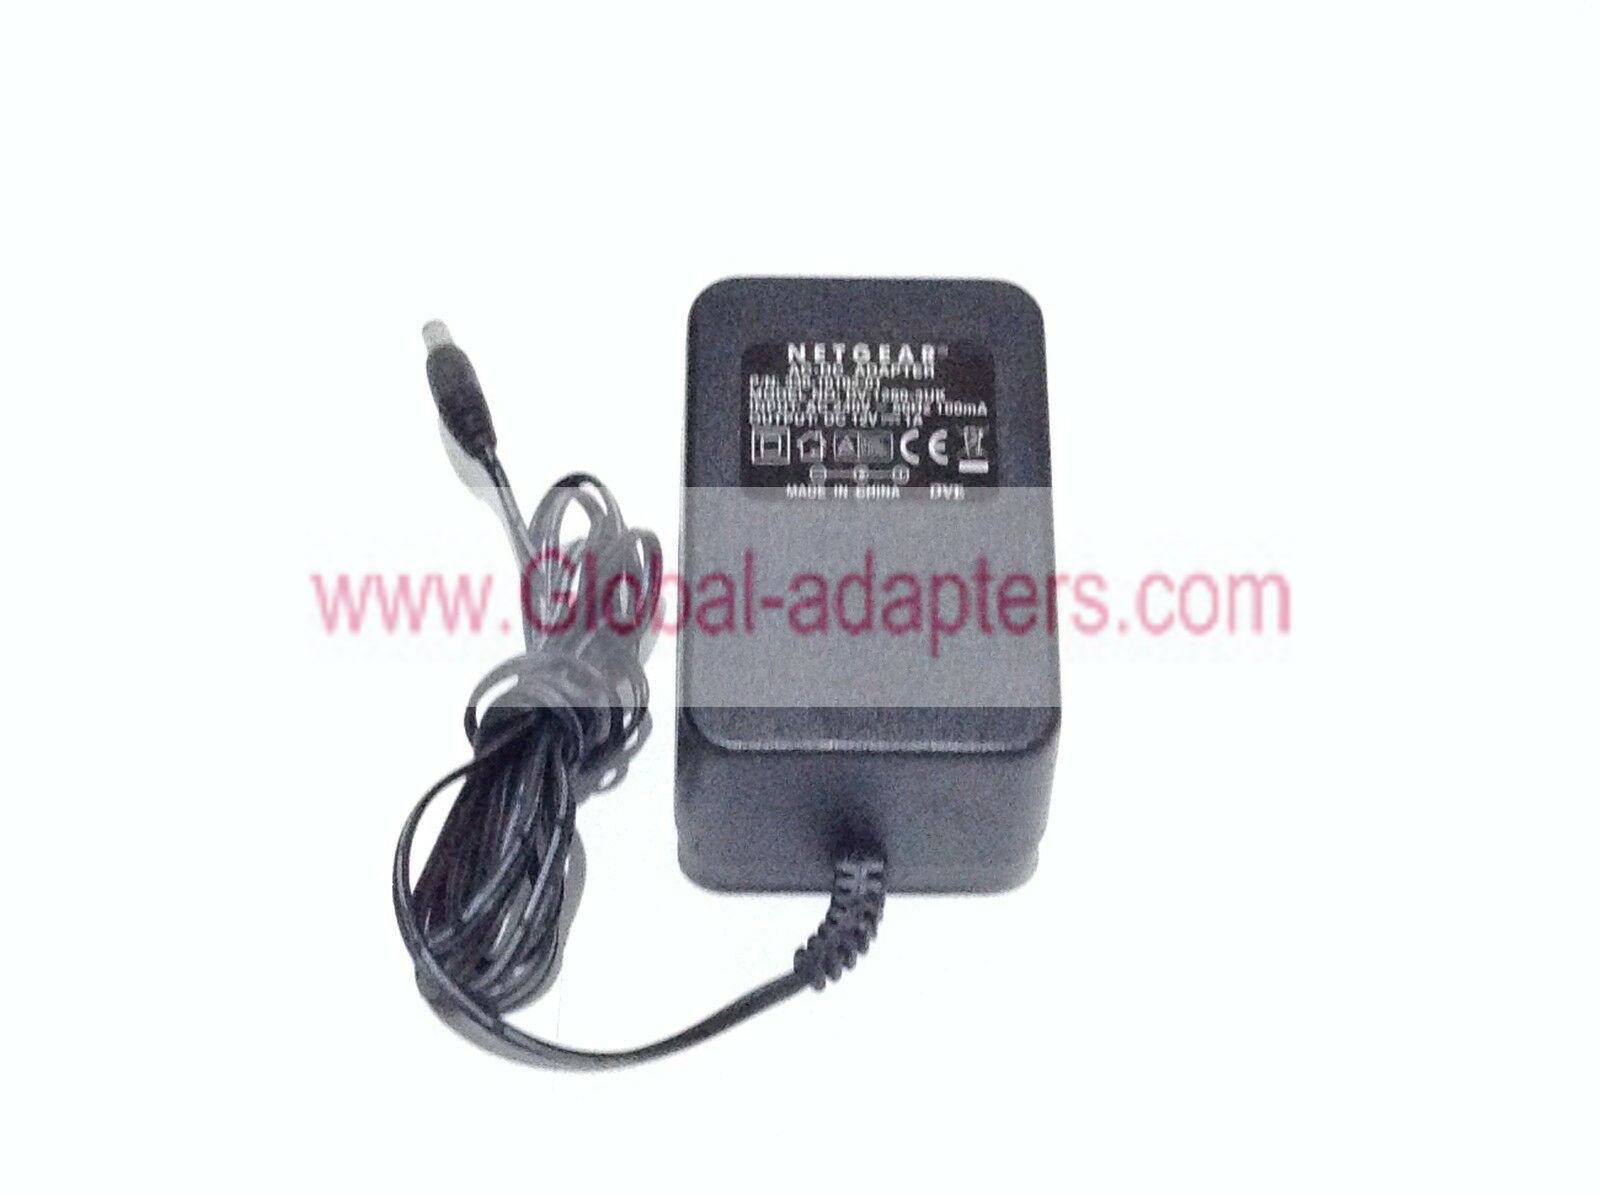 New NETGEAR 330-10102-01 DV-1280-3UK AC/DC ADAPTER FOR NETGEAR ROUTERS 12V 1A REF: T781 - Click Image to Close